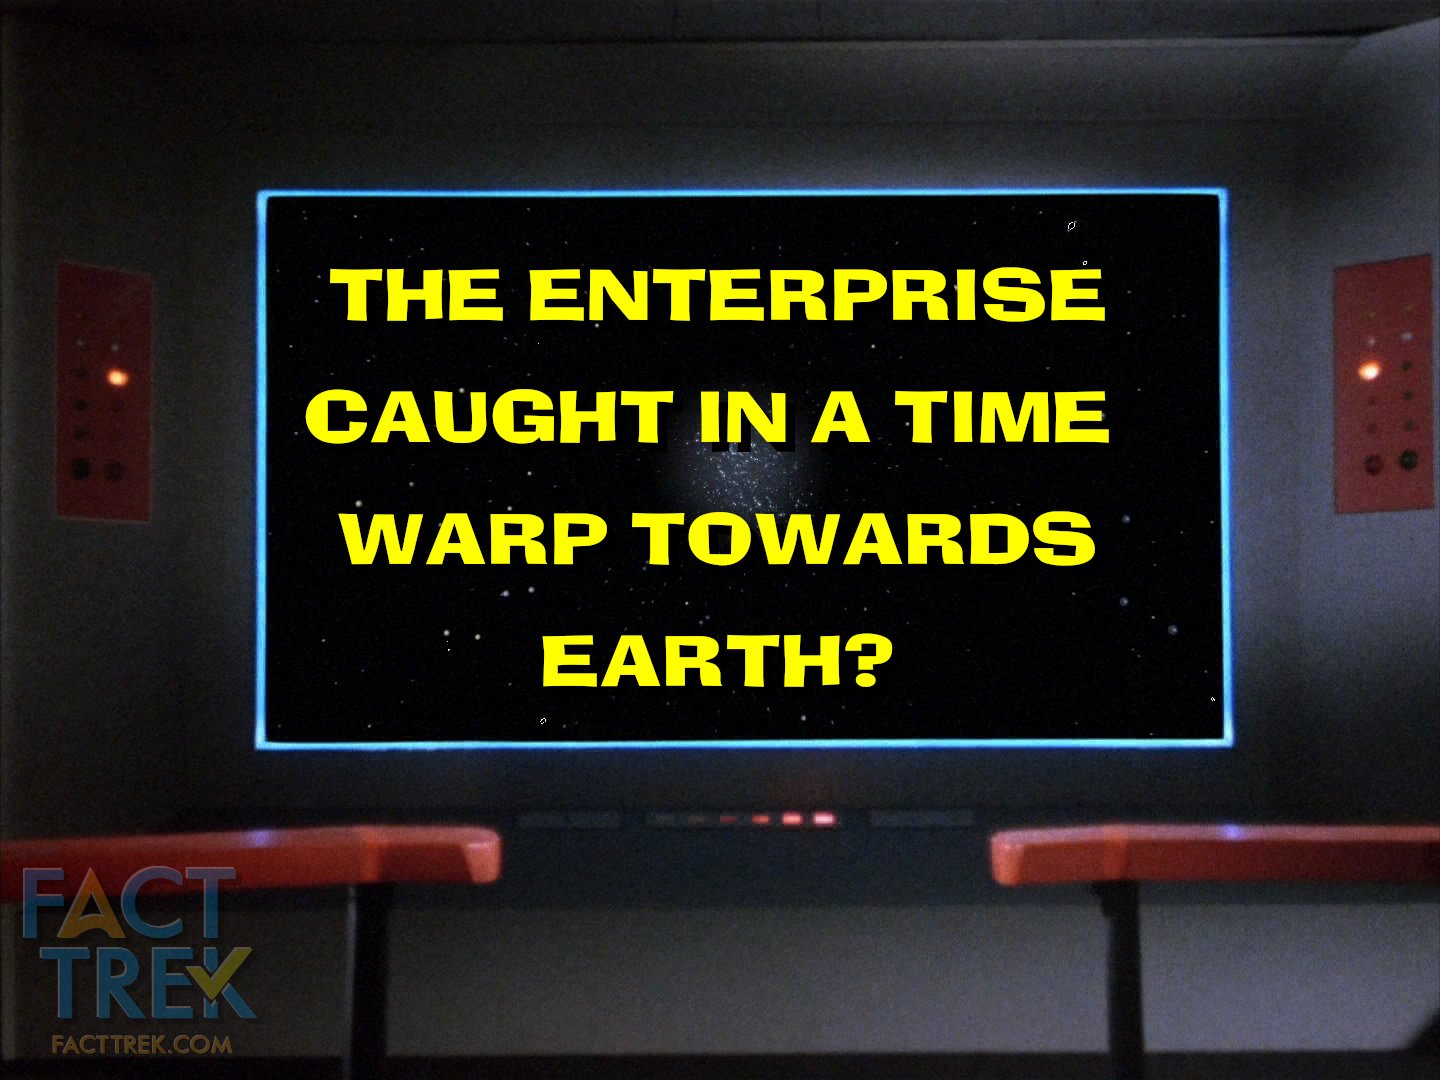  “The Enterprise caught in a time warp towards Earth?” 